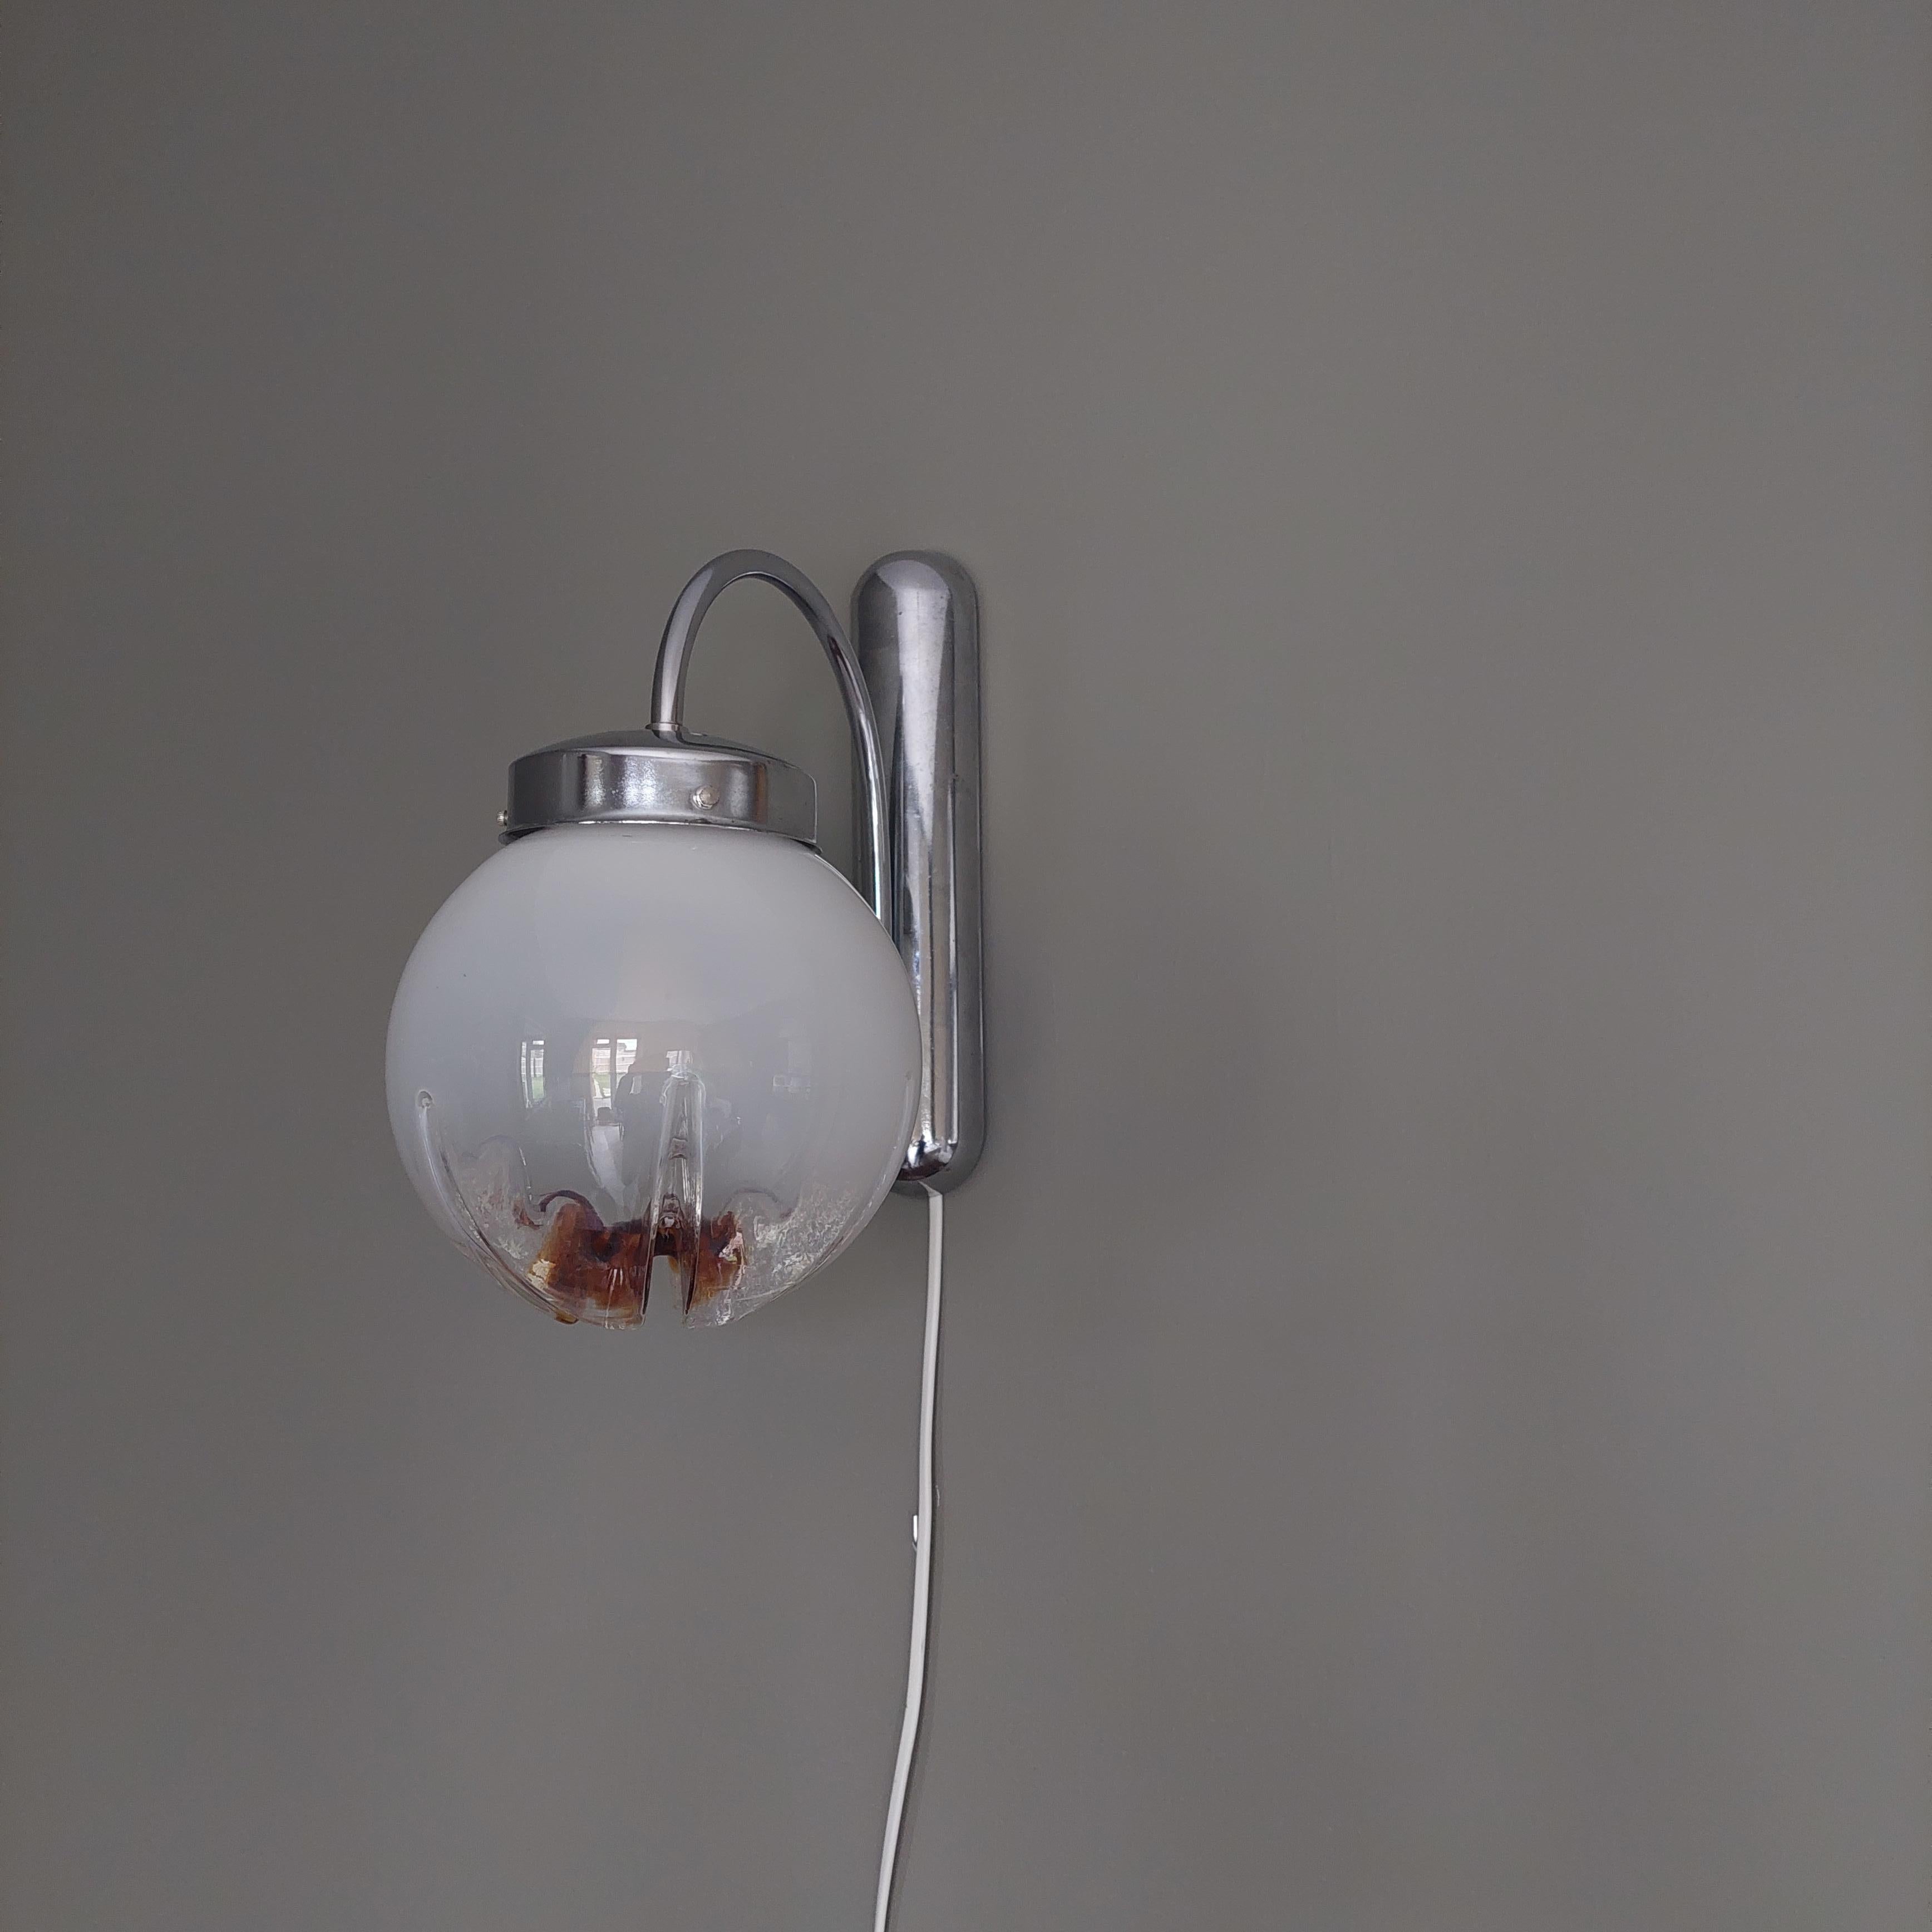 This is a beautiful 70's Mazzega wall light.
The glass globes are typical Toni Zuchieri: Murano glass white to clear gradient with an ochre spot.

The wall attachment and accesories are made of chrome .
The Chrome arm that holds the globe can be